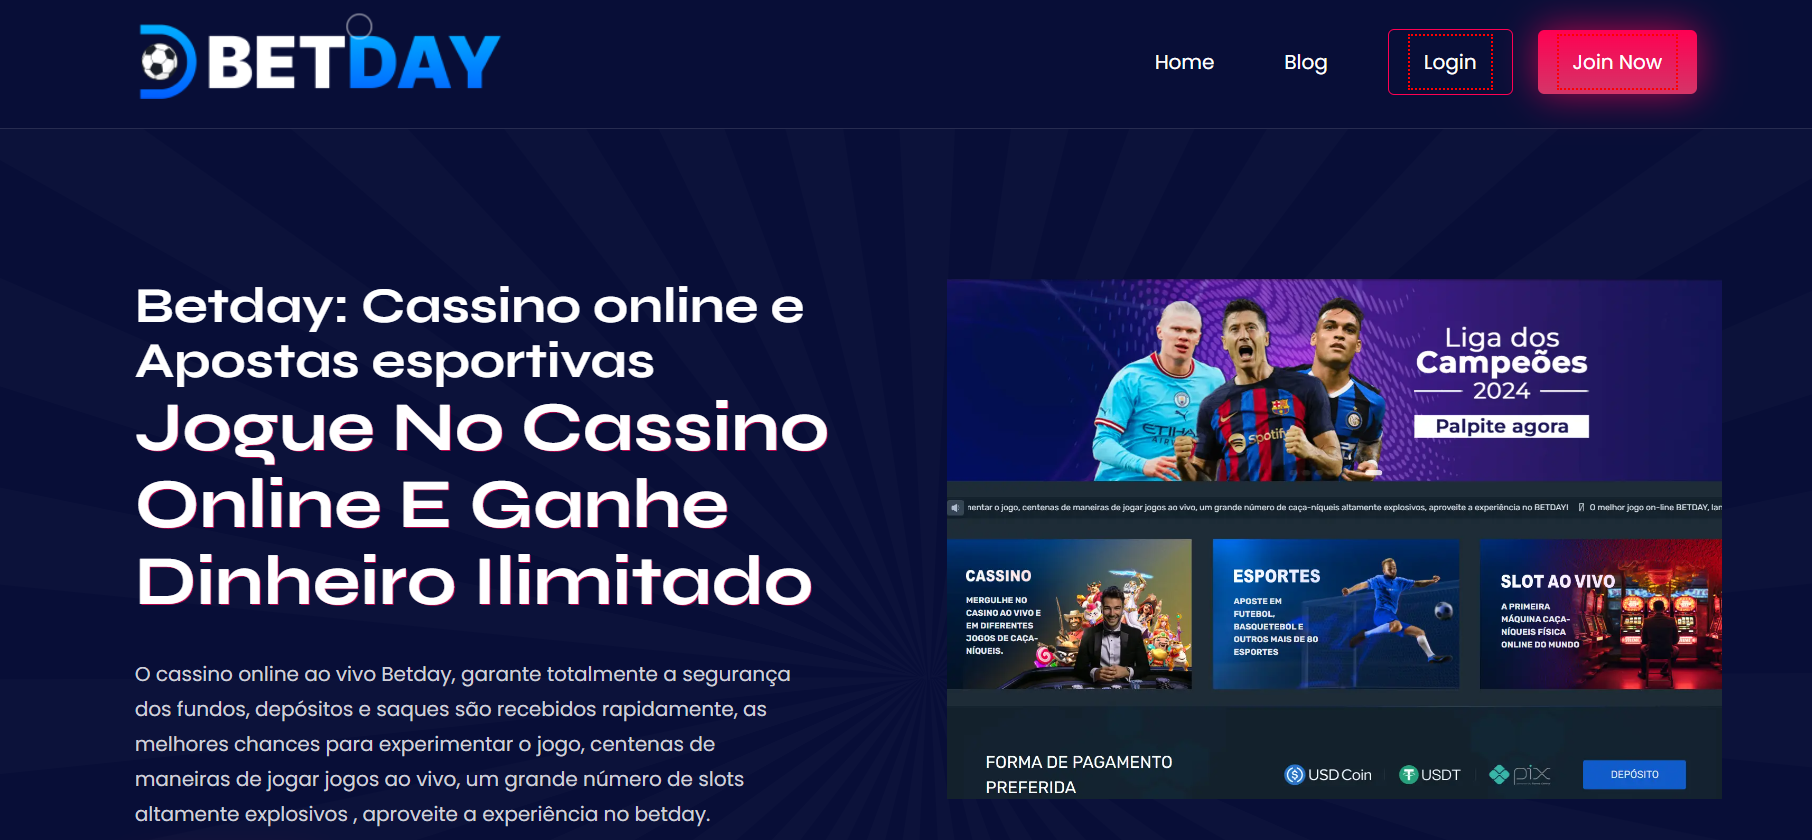 The Best Games To Play on Betday Casino Online